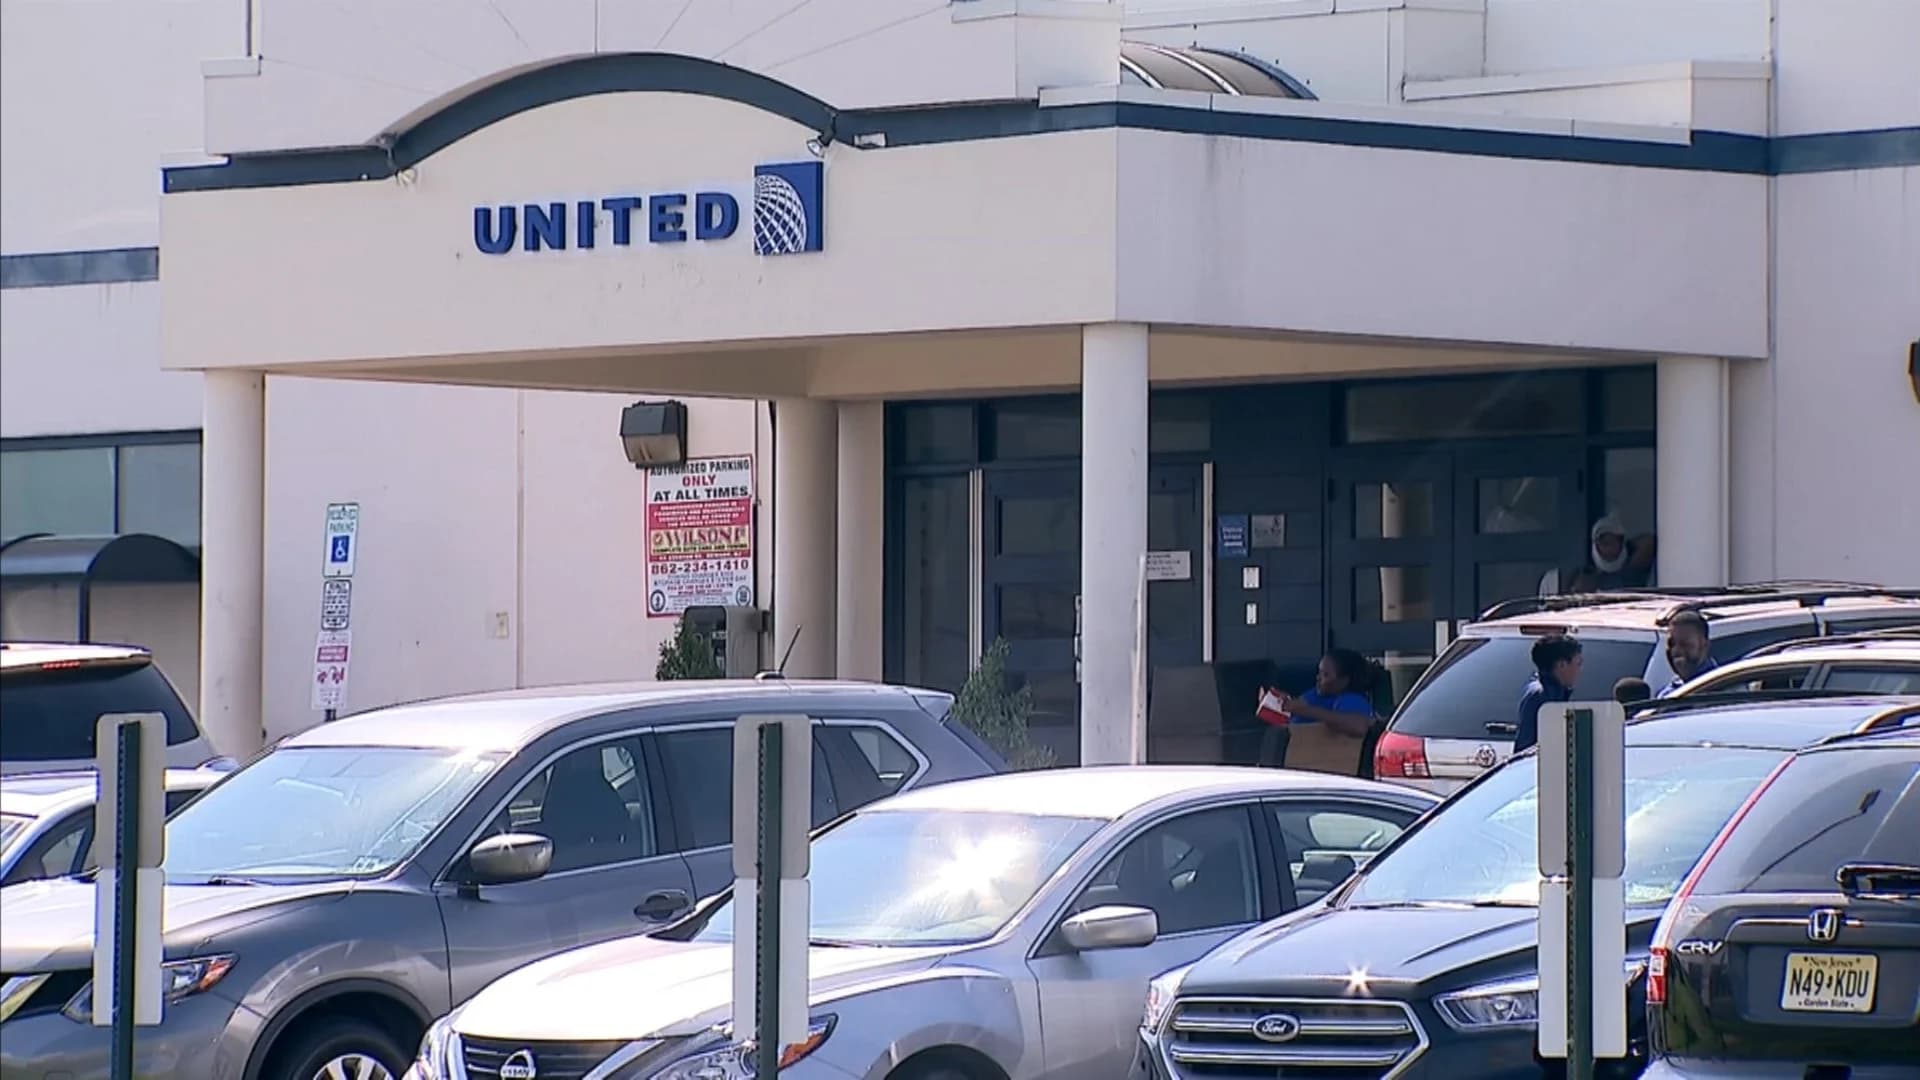 Listeria bacteria found inside cooler at United Airlines kitchen facility